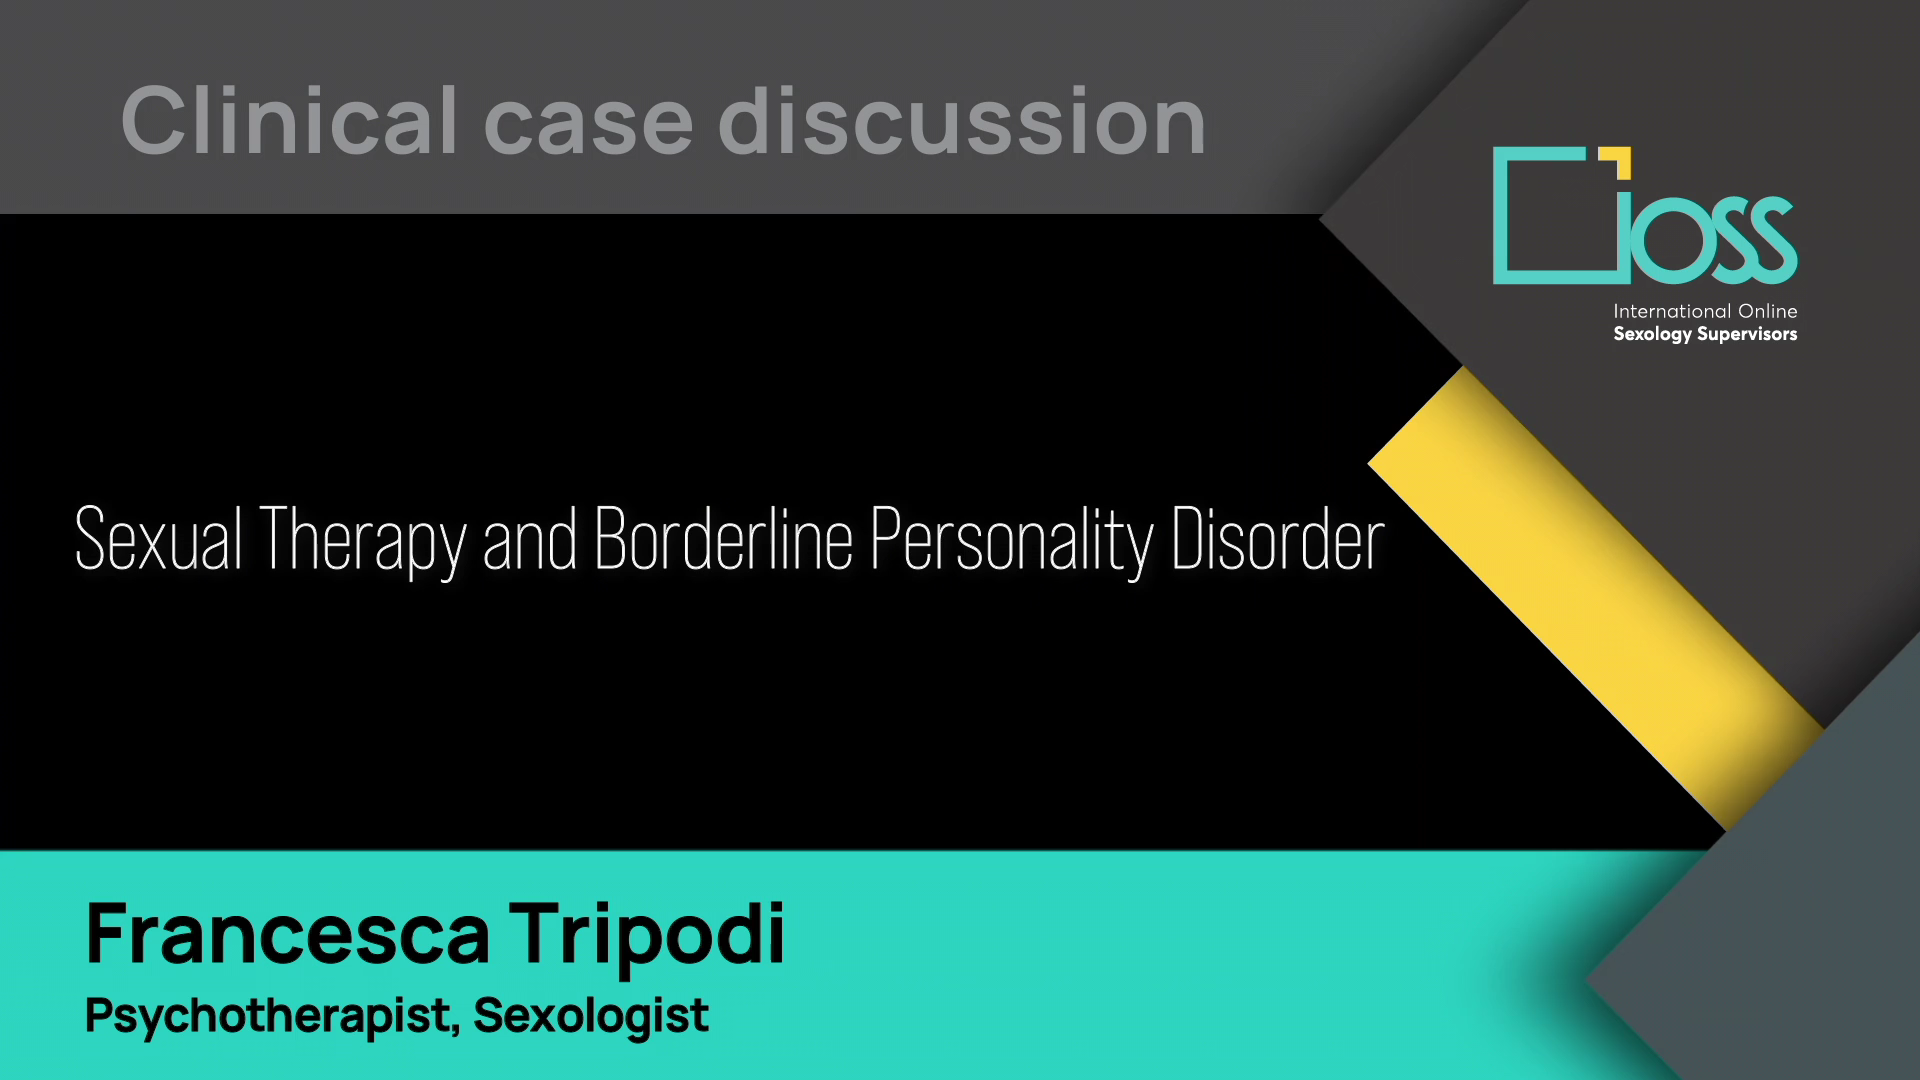 Sexual Therapy and Borderline Personality Disorder